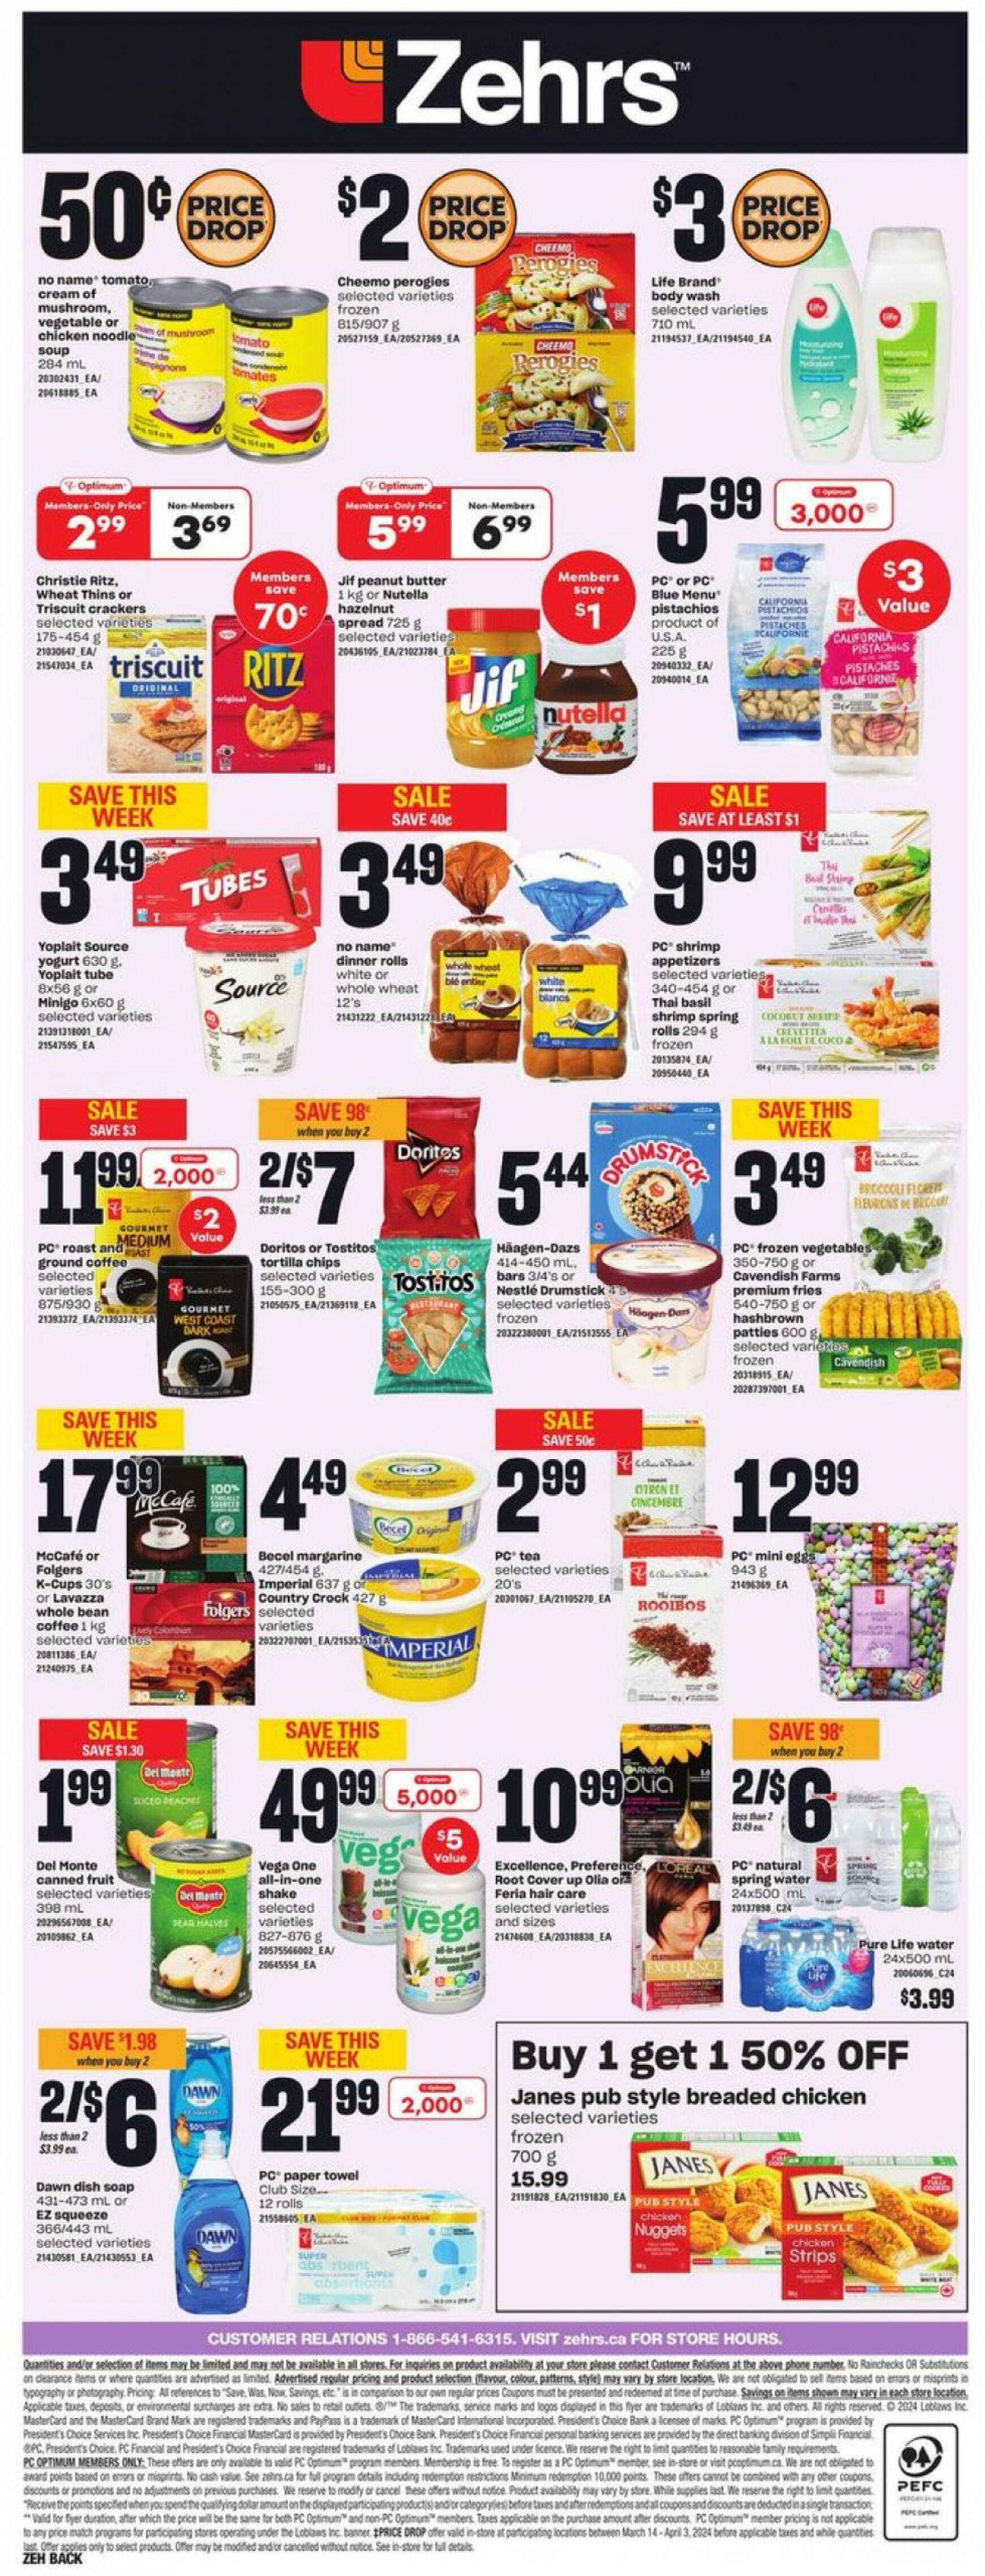 zehrs - Zehrs valid from 28.03.2024 - page: 6